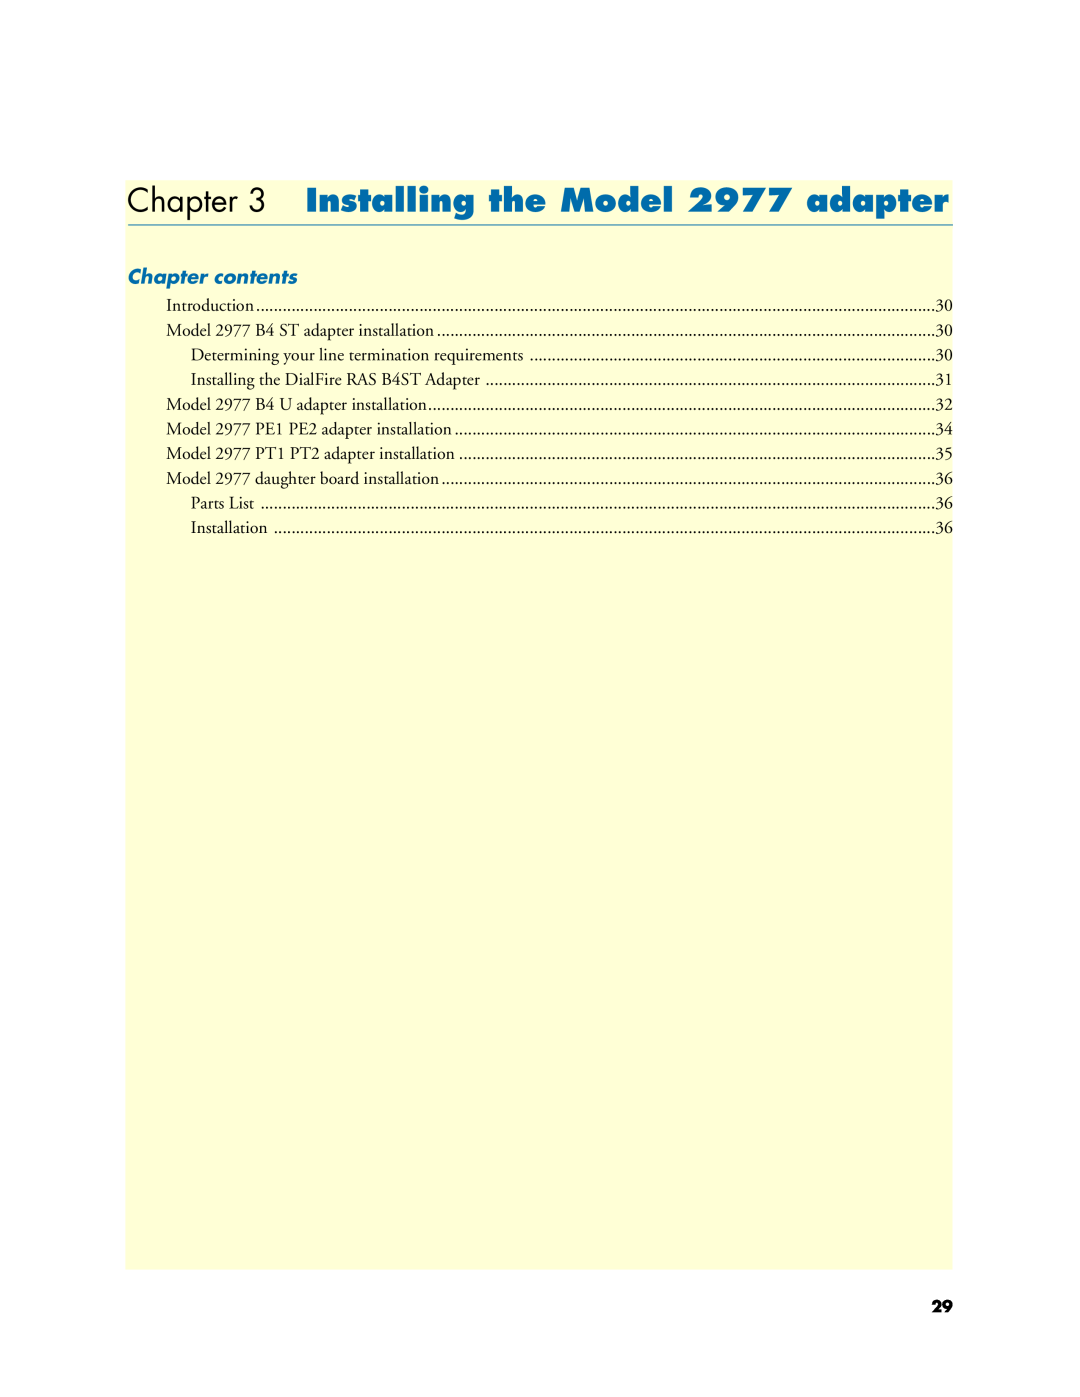 Patton electronic manual Installing the Model 2977 adapter, Chapter contents 